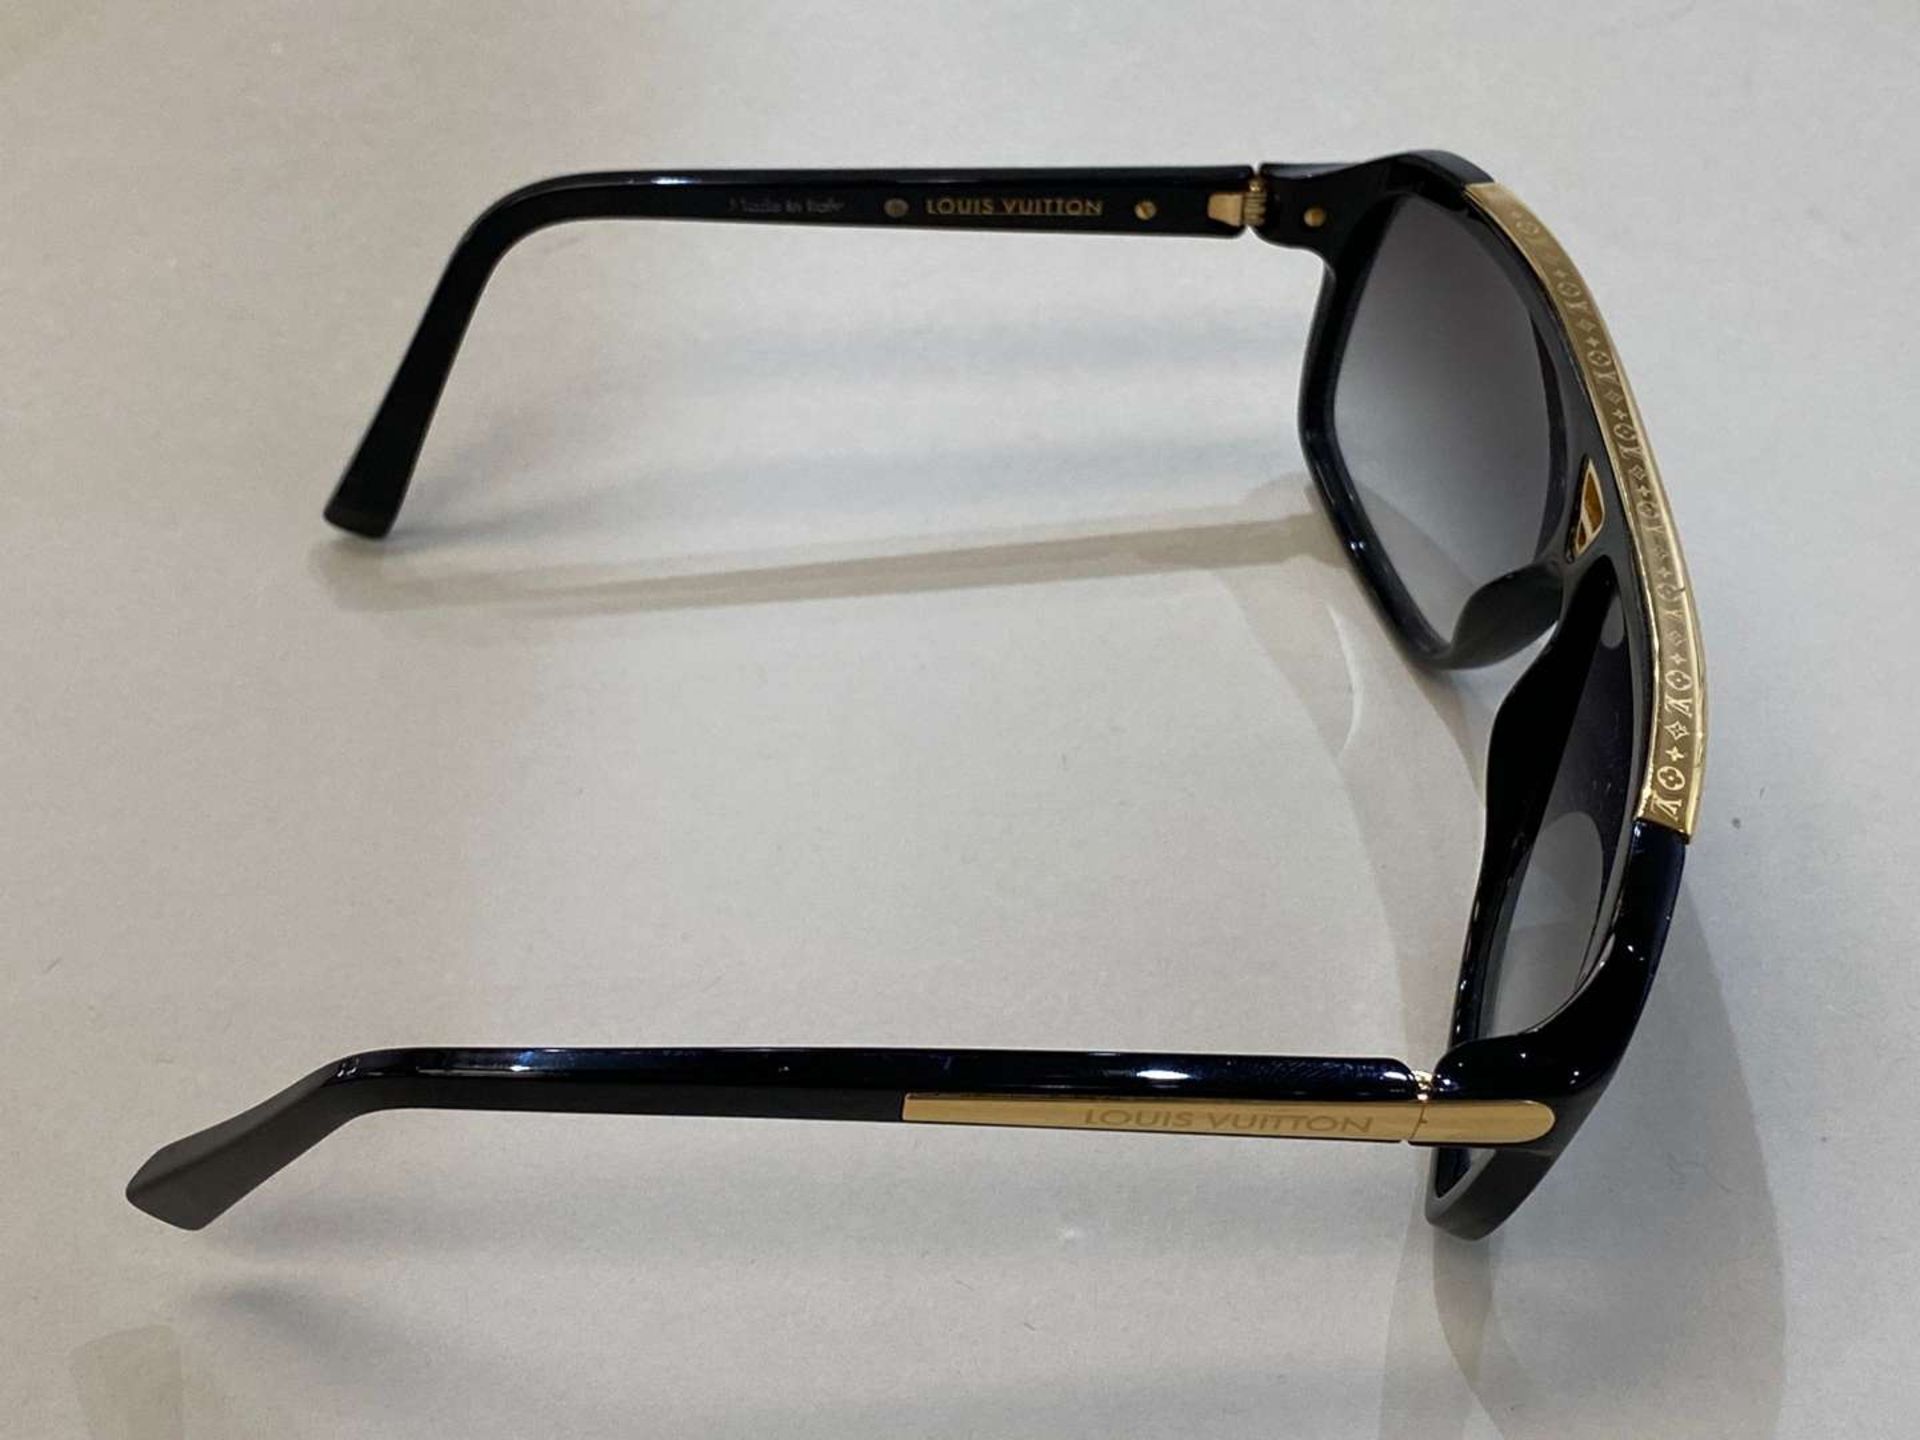 LOUIS VUITTON, a pair of Italian, gilt mounted, black framed sunglasses - Image 2 of 3